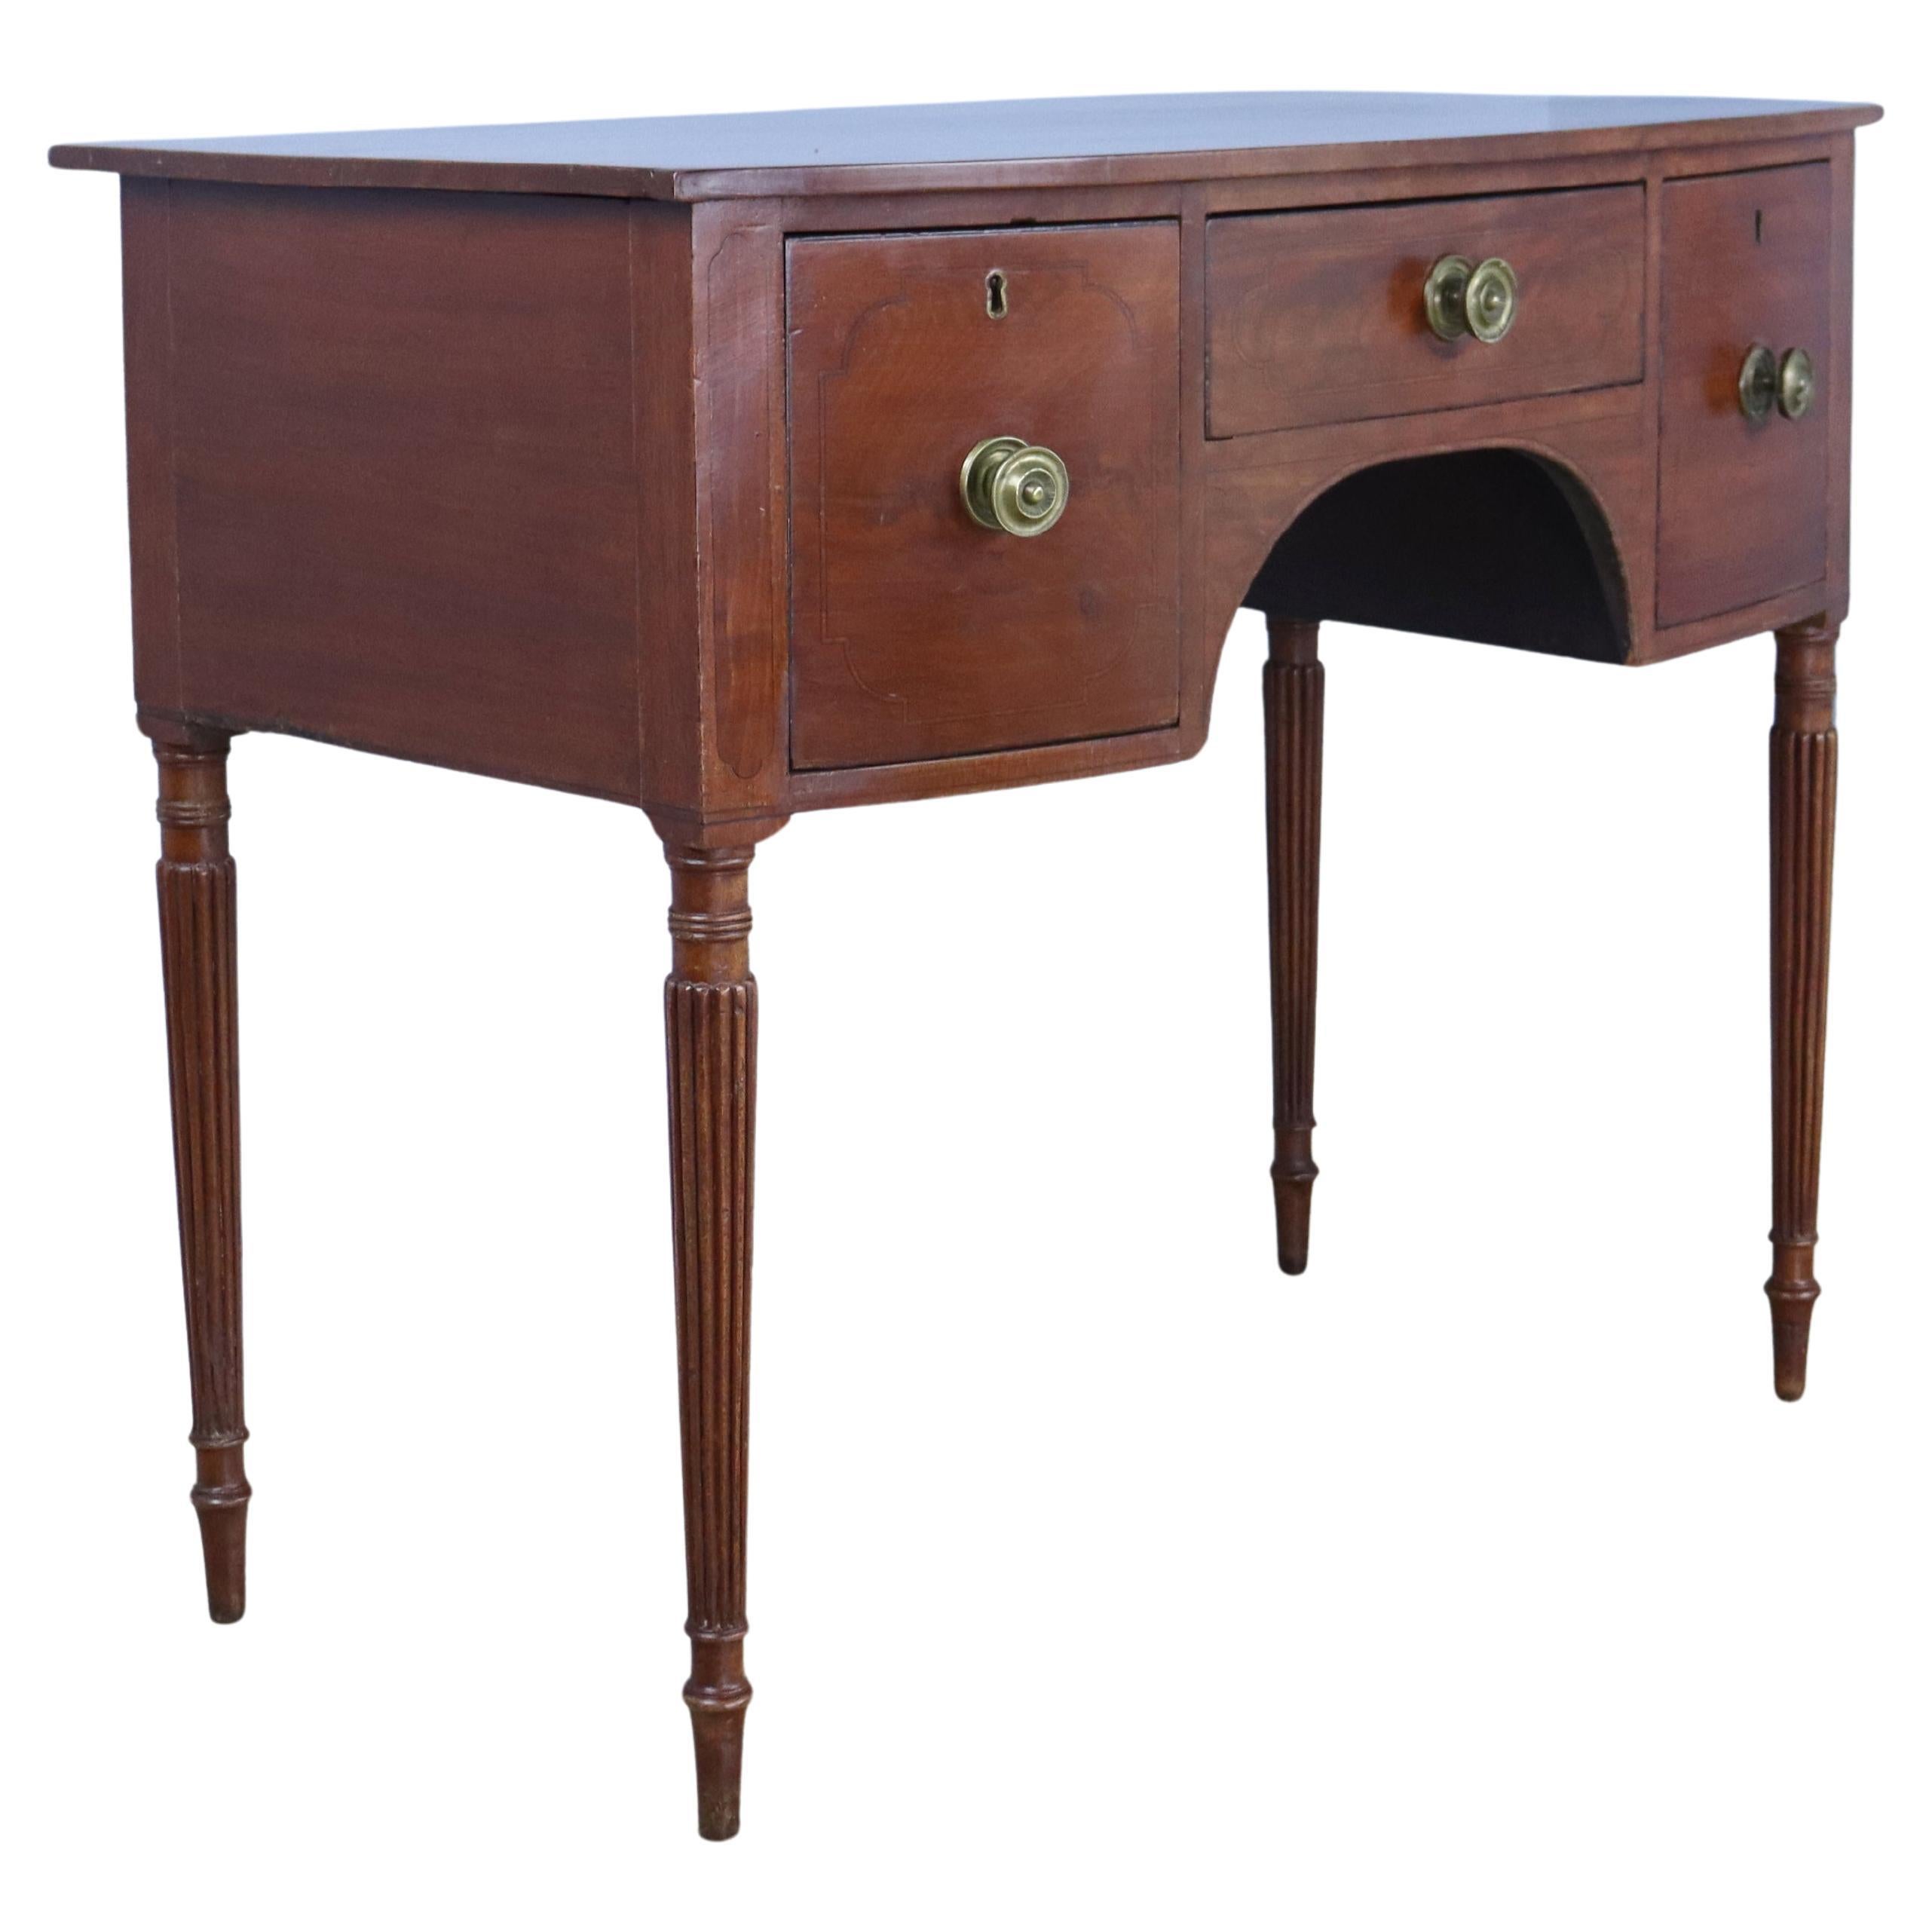 Georgian Mahogany Bowfront Side Table or Small Server